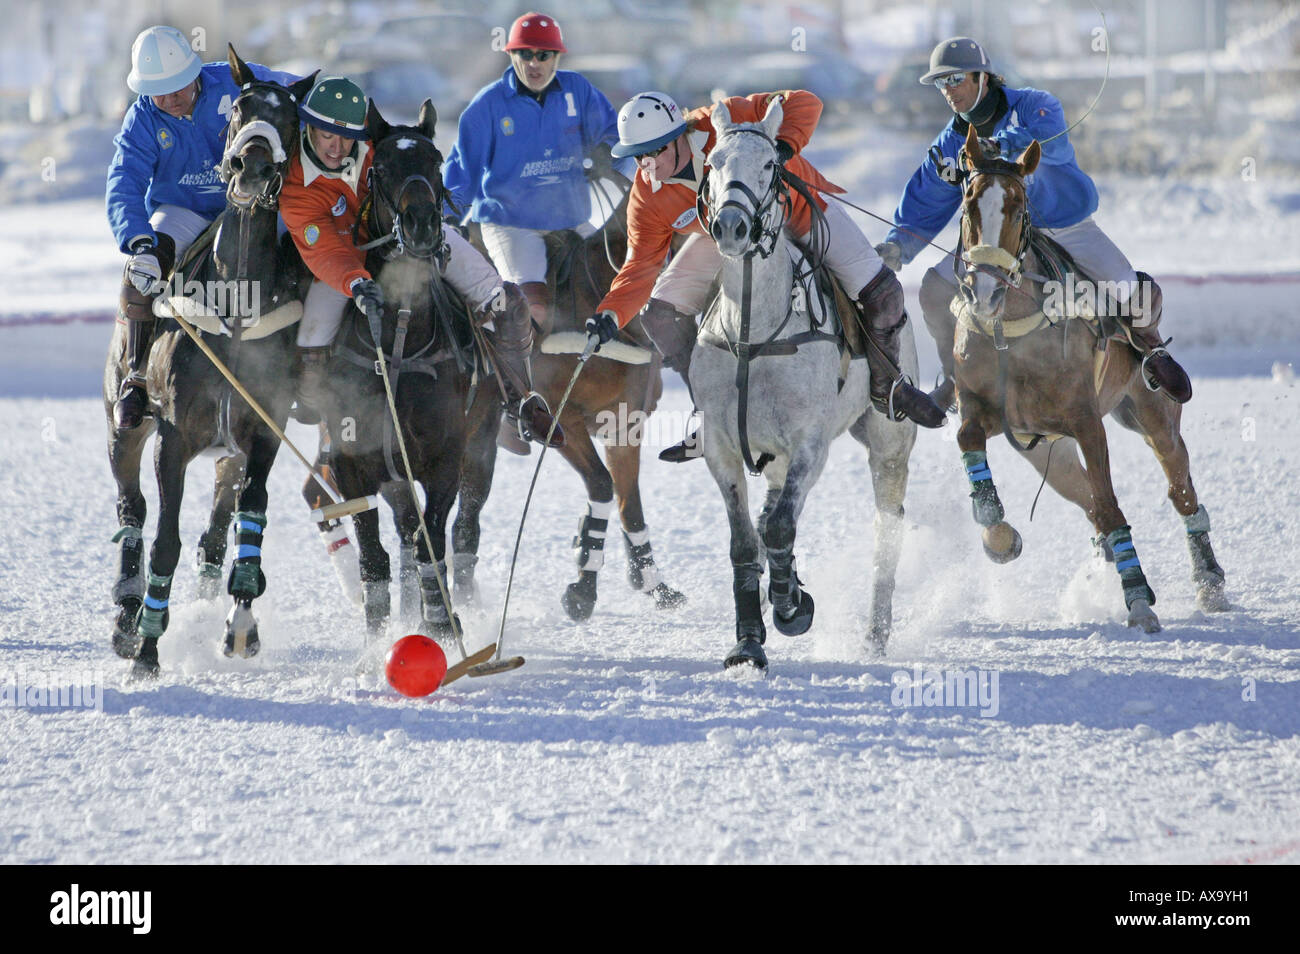 Playing polo in the snow, International tournament in Livigno, Italy Stock Photo